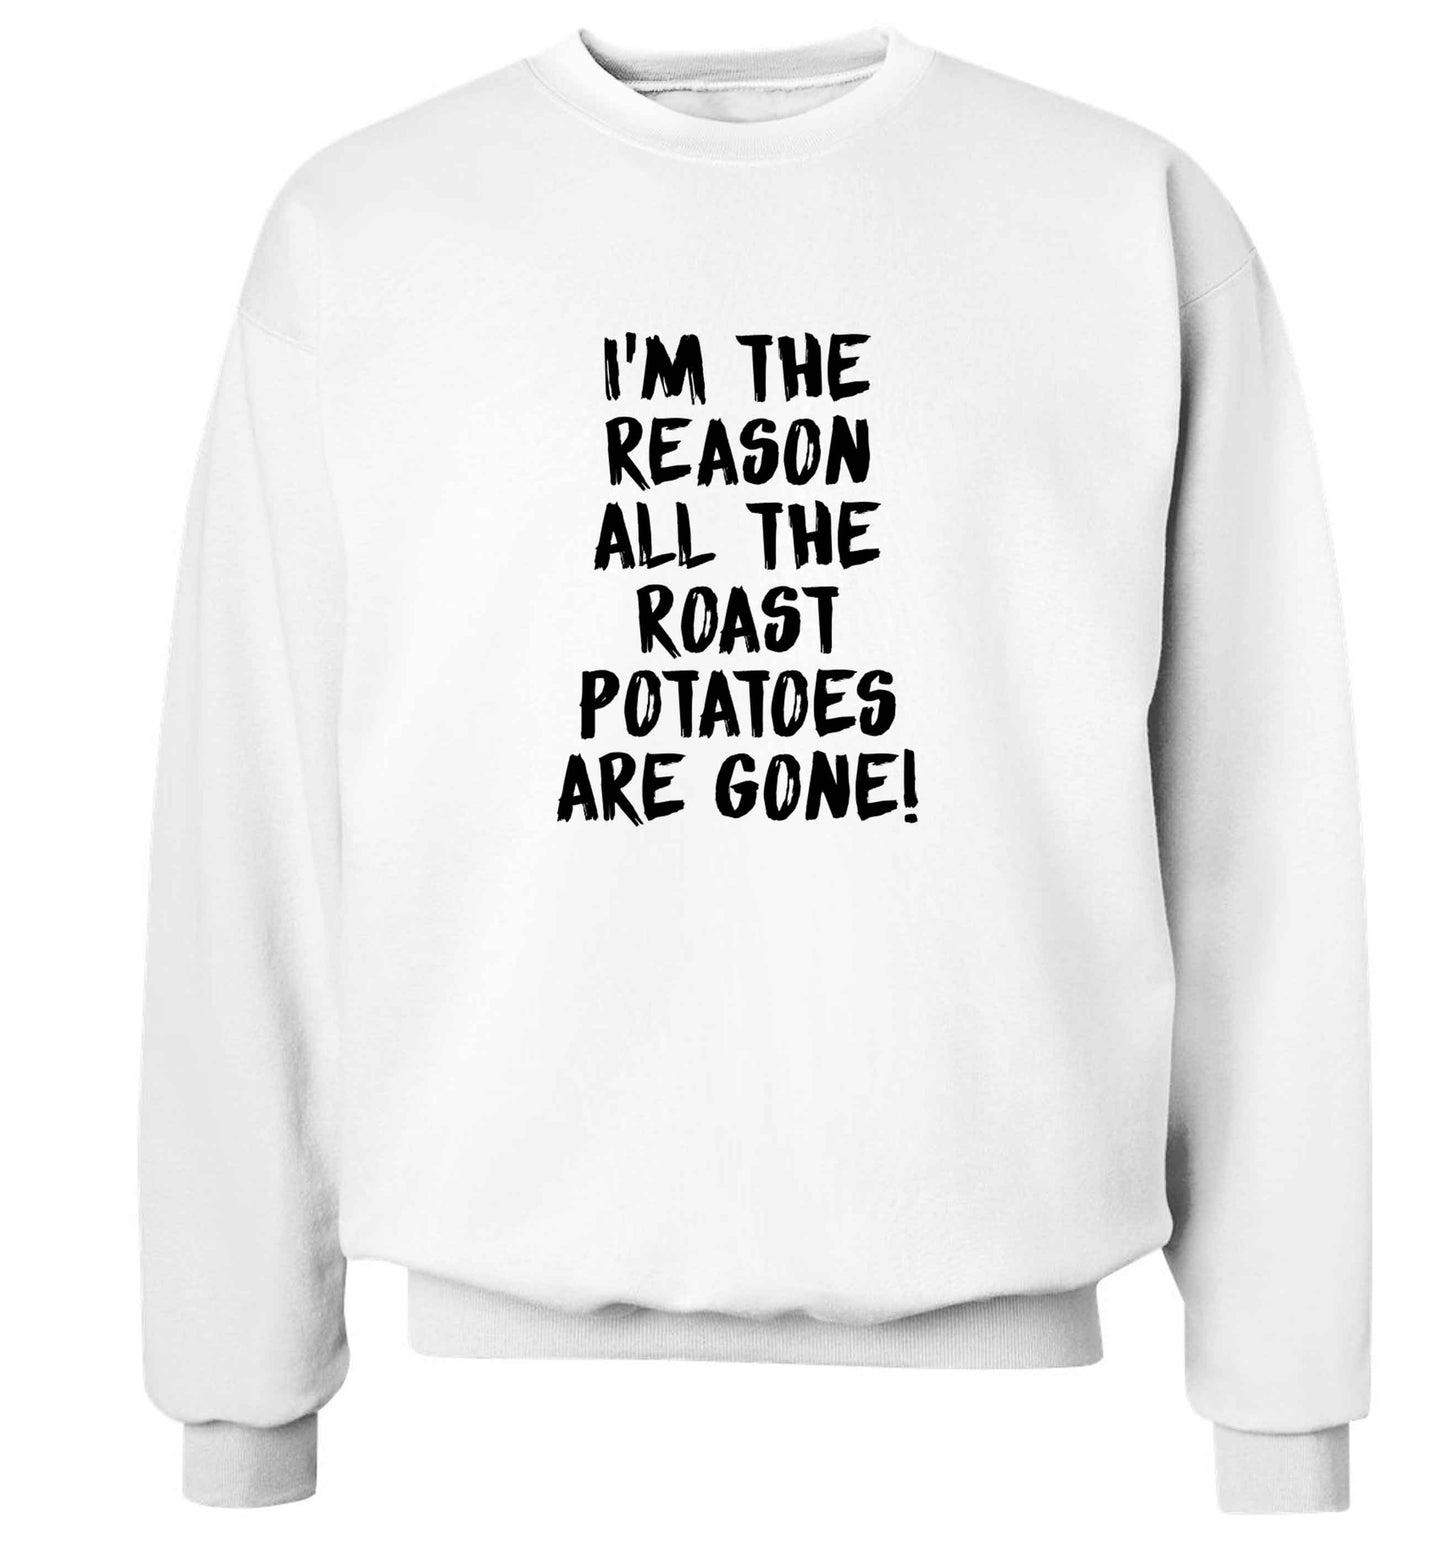 I'm the reason all the roast potatoes are gone adult's unisex white sweater 2XL